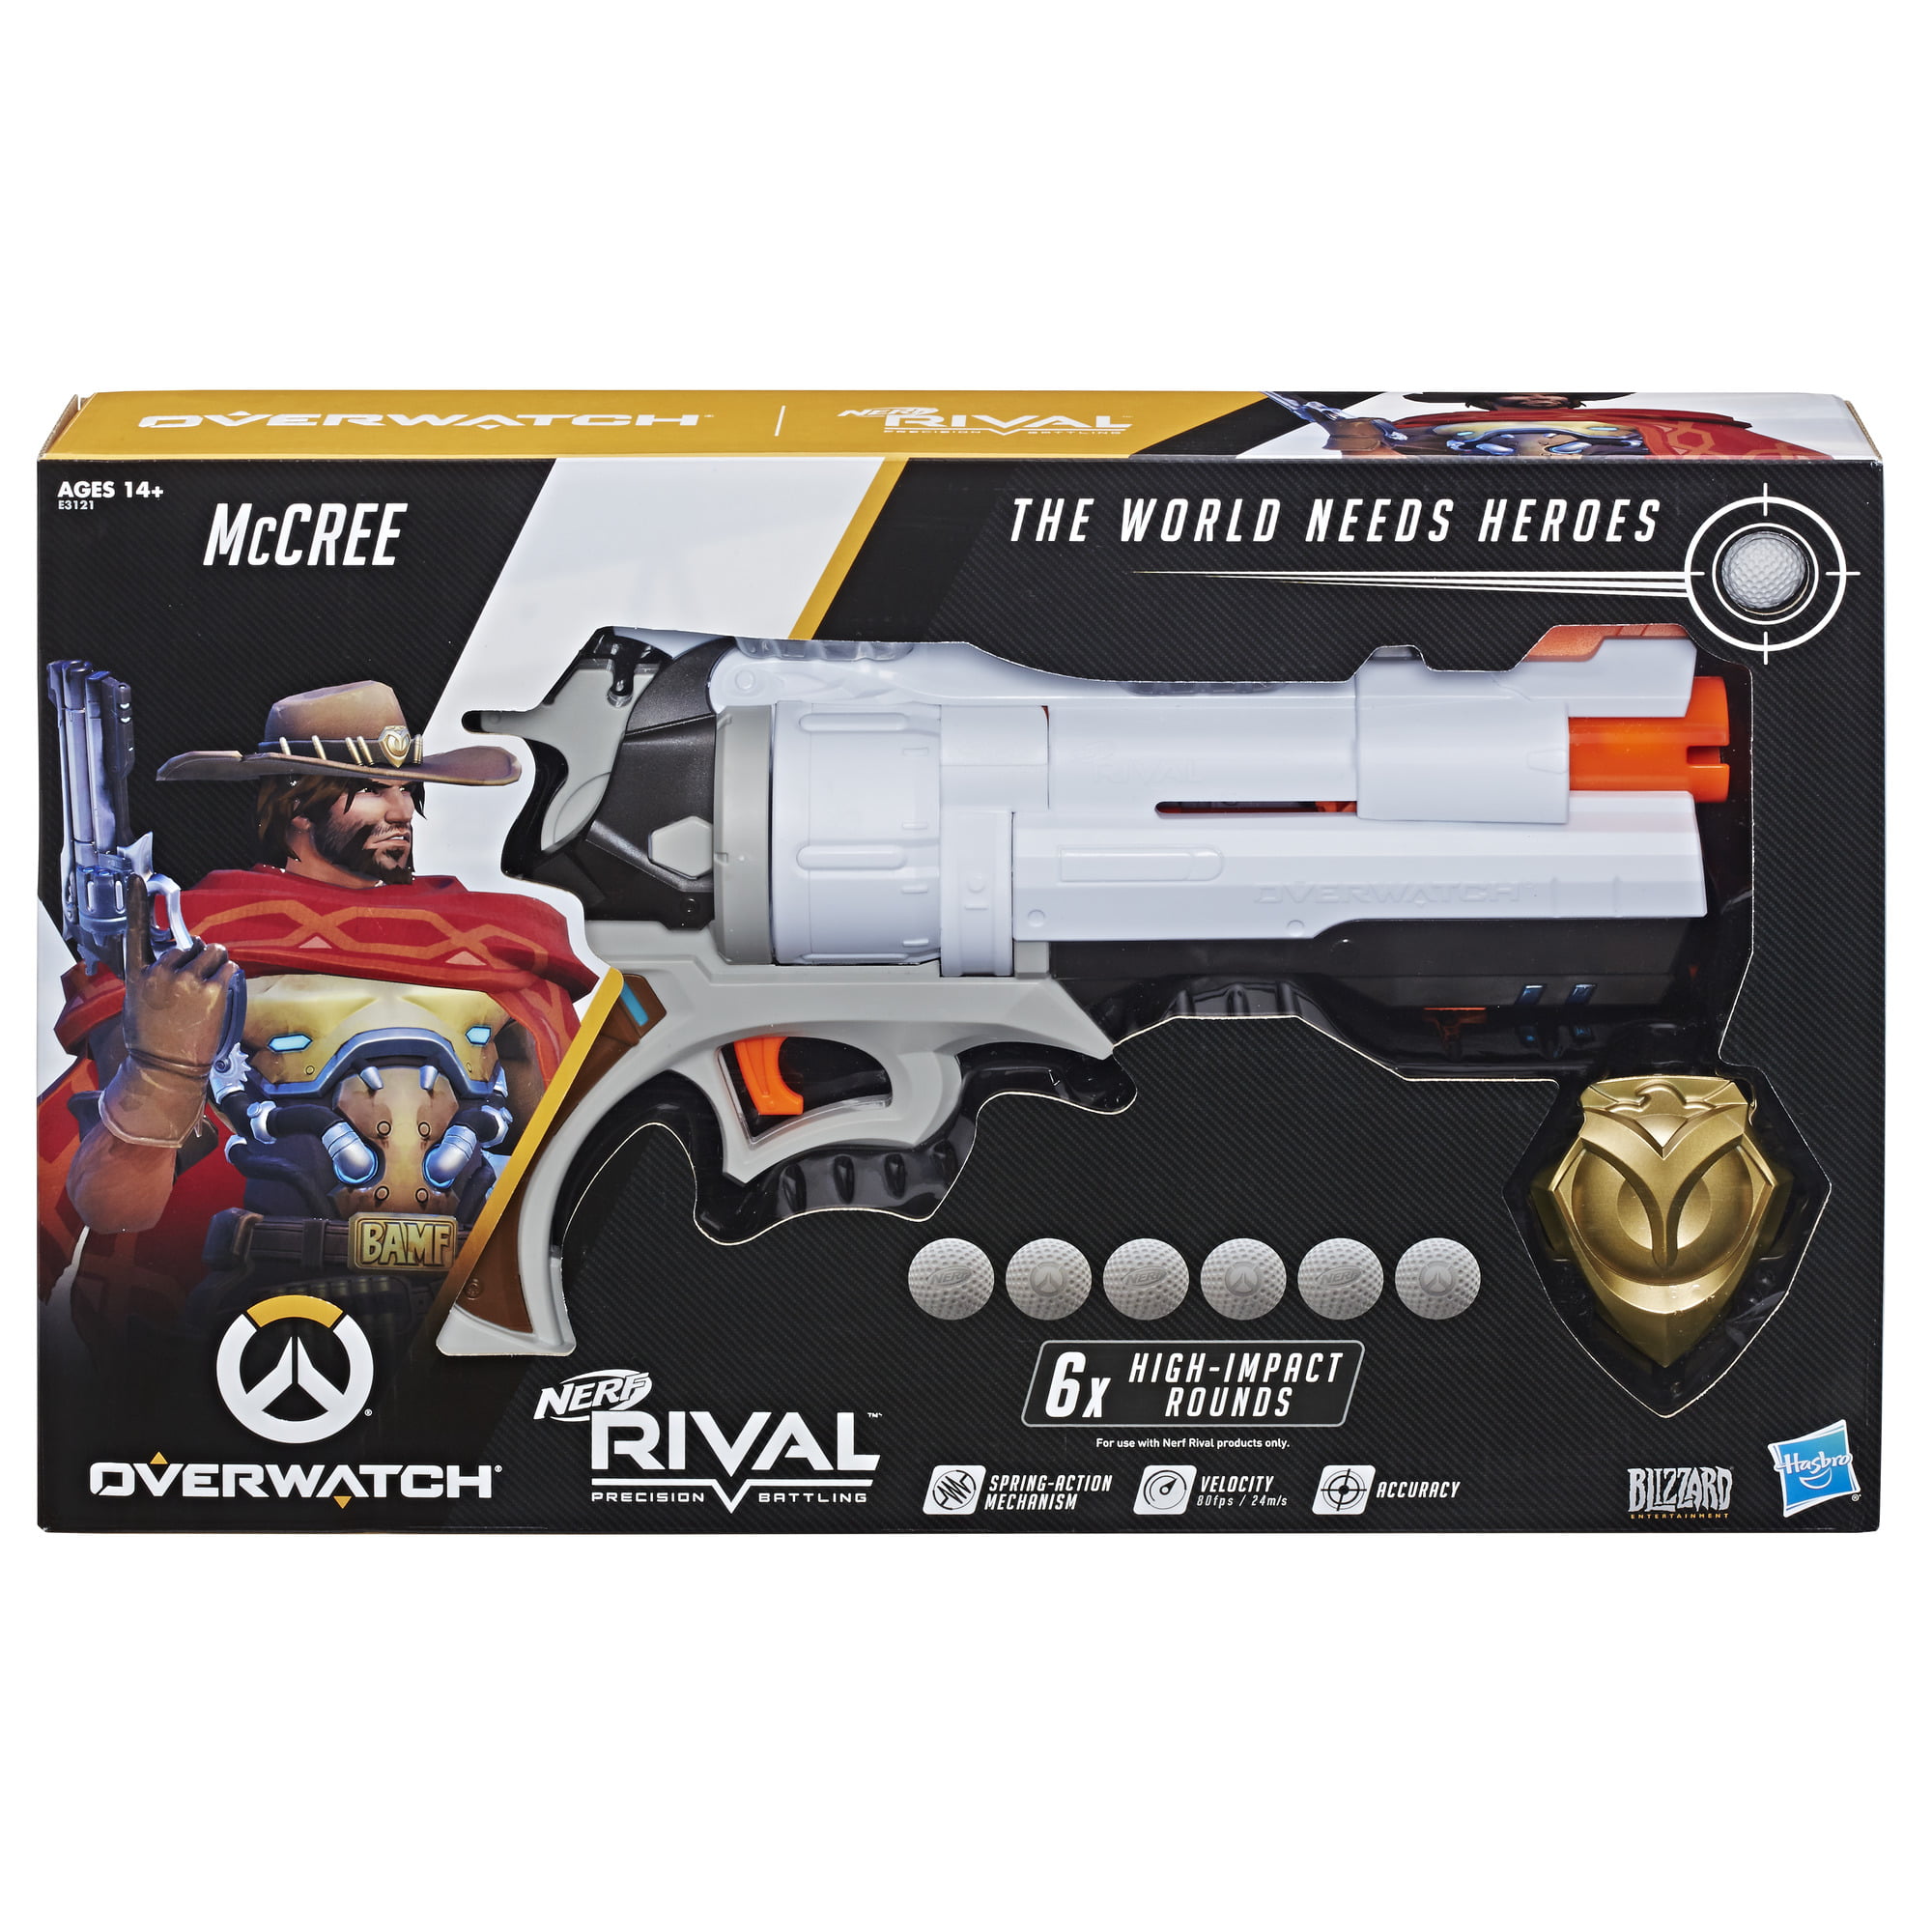 Rival McCree Blaster with Die Cast Badge & 6 Rival Rounds Walmart.com